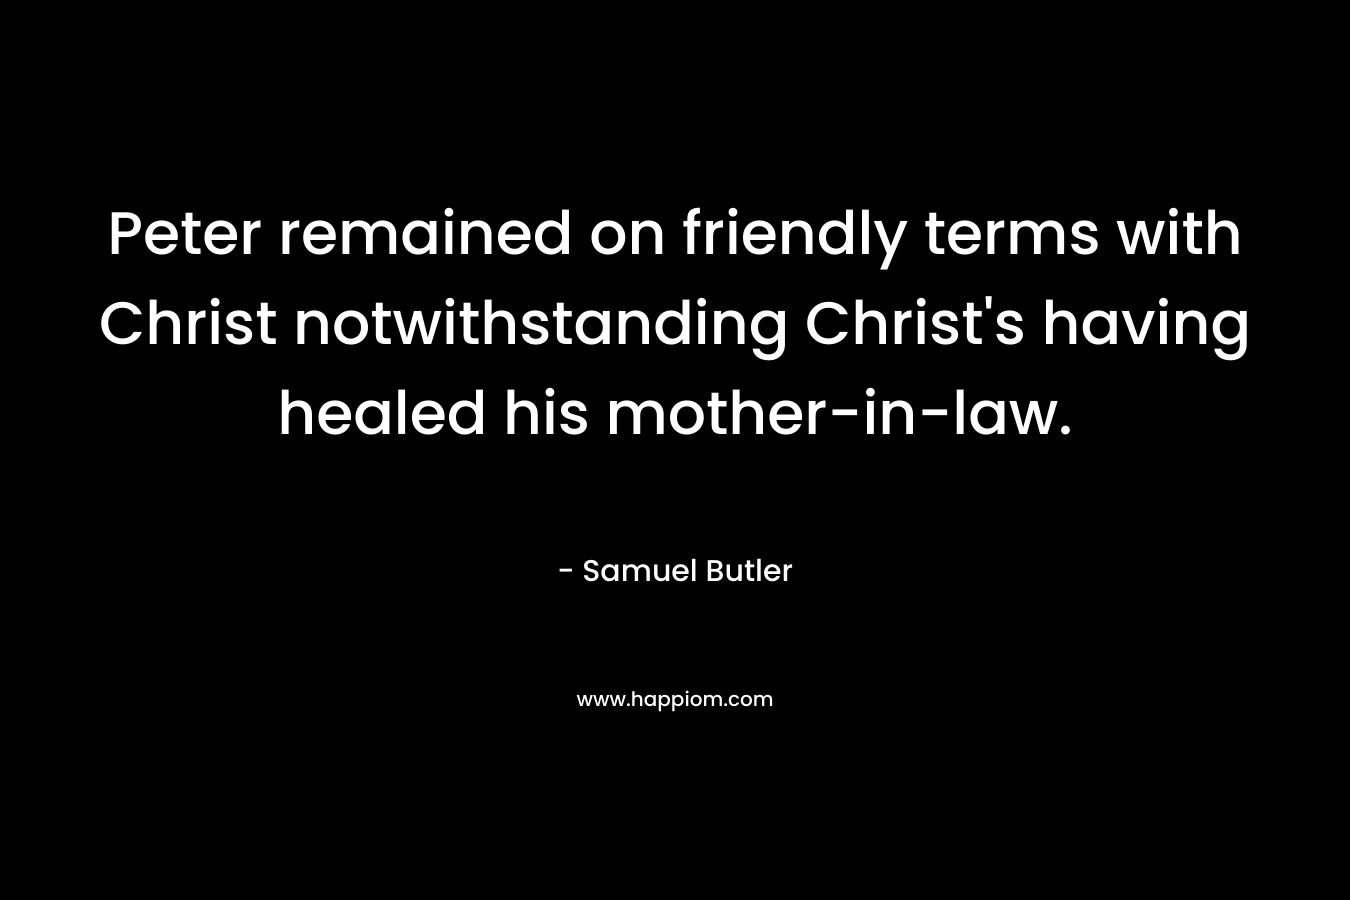 Peter remained on friendly terms with Christ notwithstanding Christ’s having healed his mother-in-law. – Samuel Butler